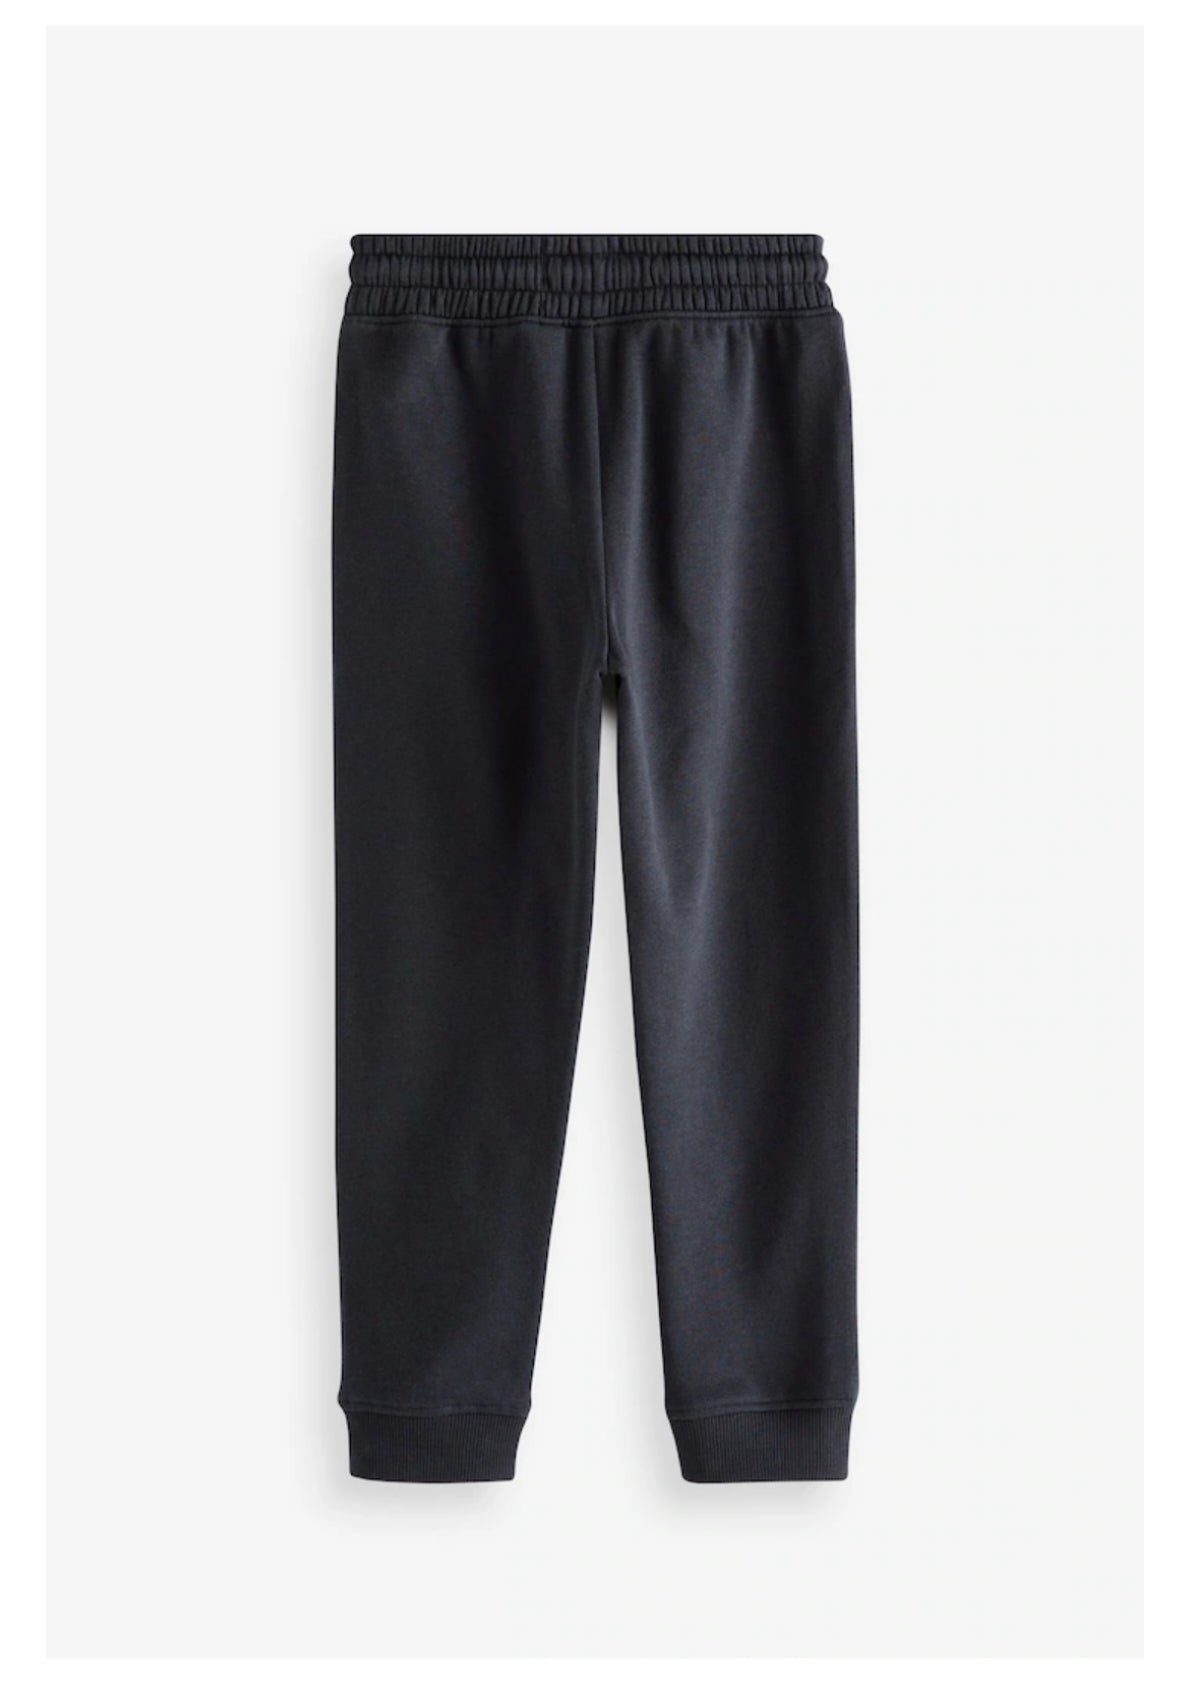 Boys Jercy Jogger Trouser - Charcoal